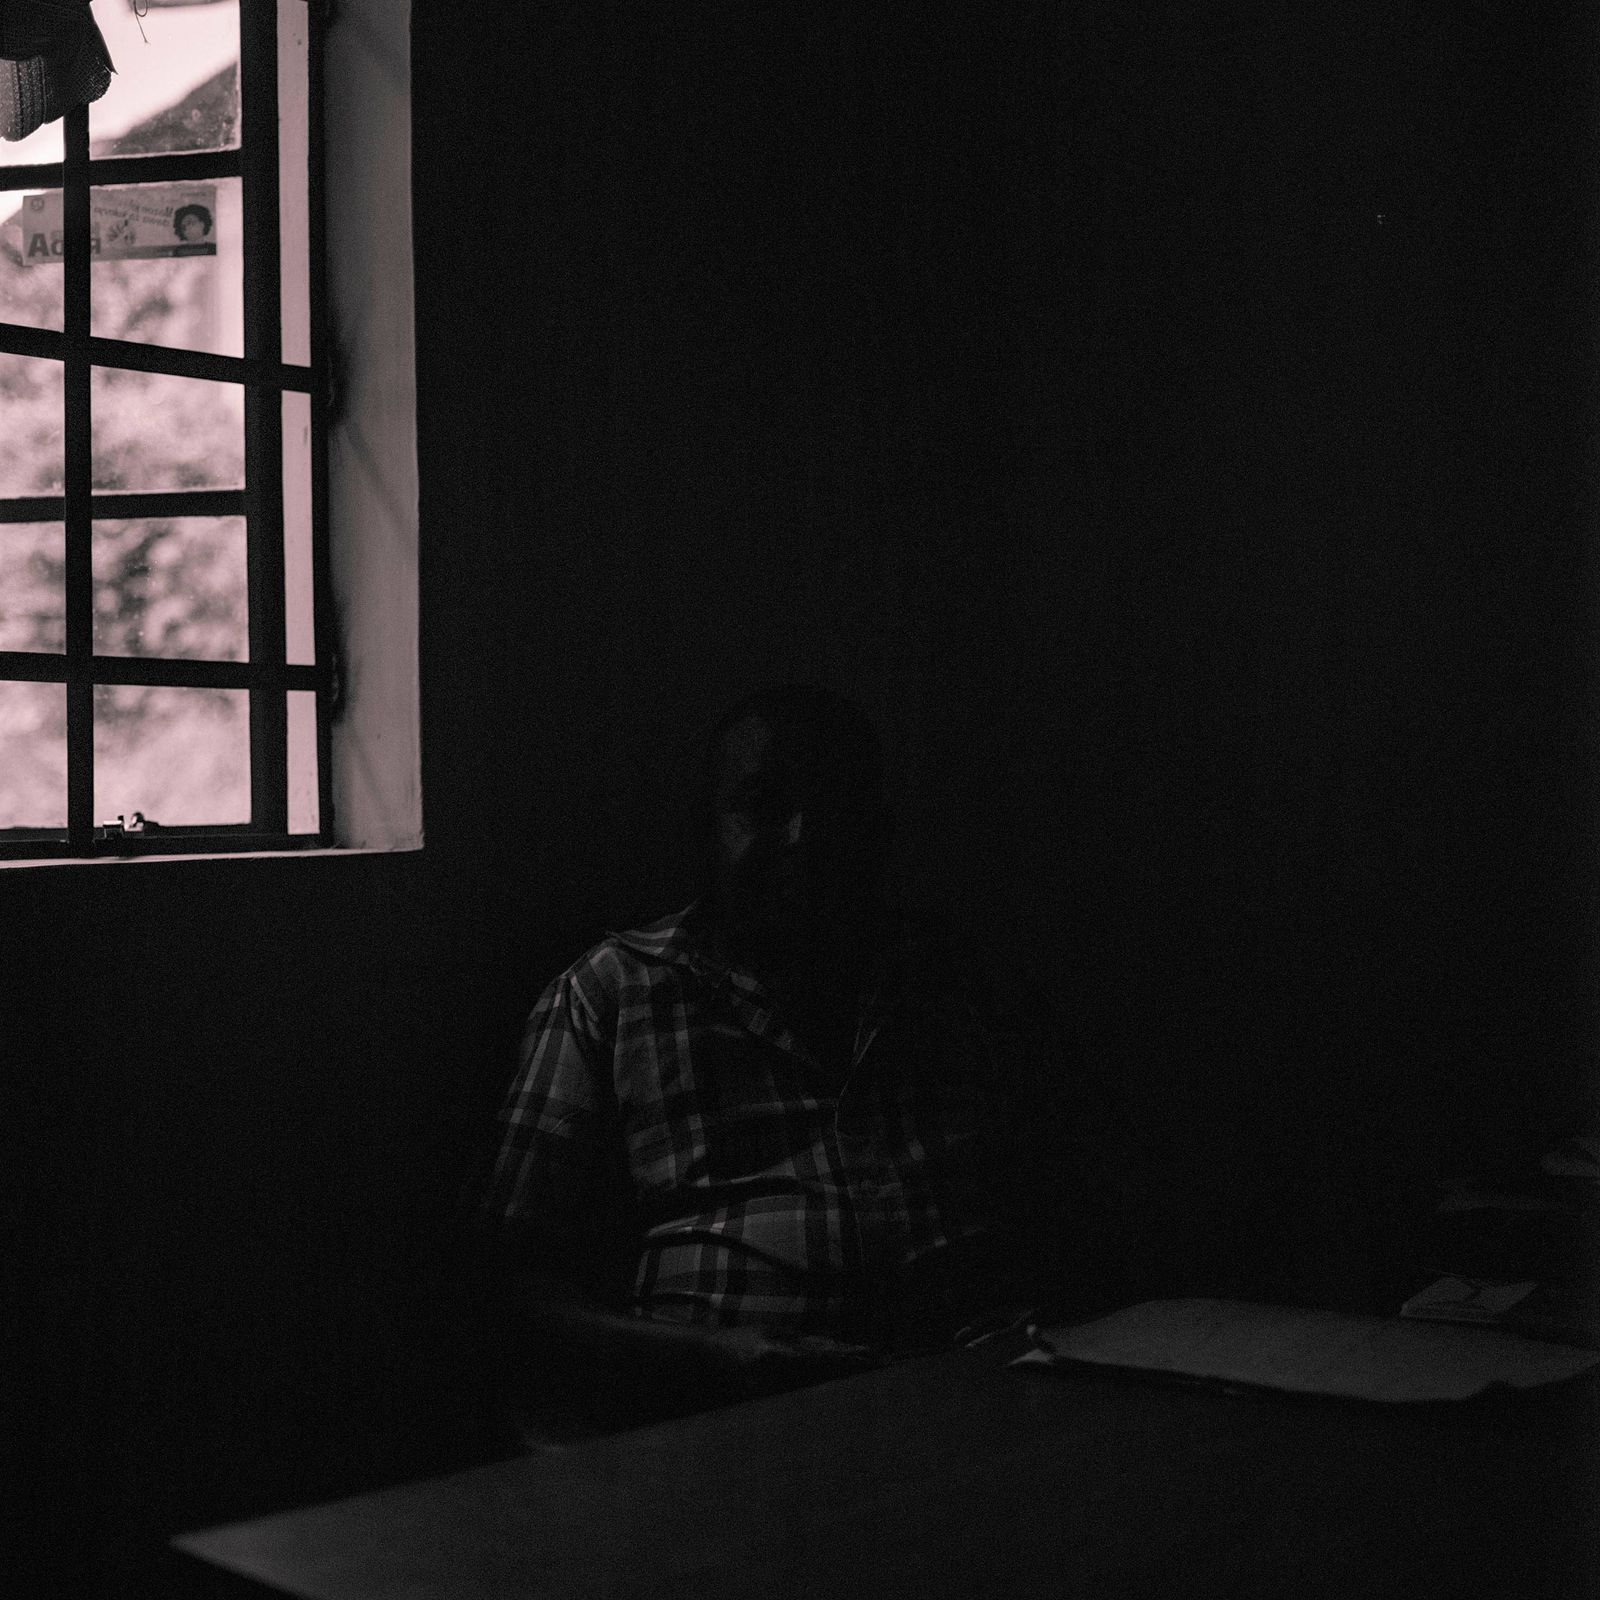 © Cynthia MaiWa Sitei - Image from the If This Is A Human: a great curiosity photography project